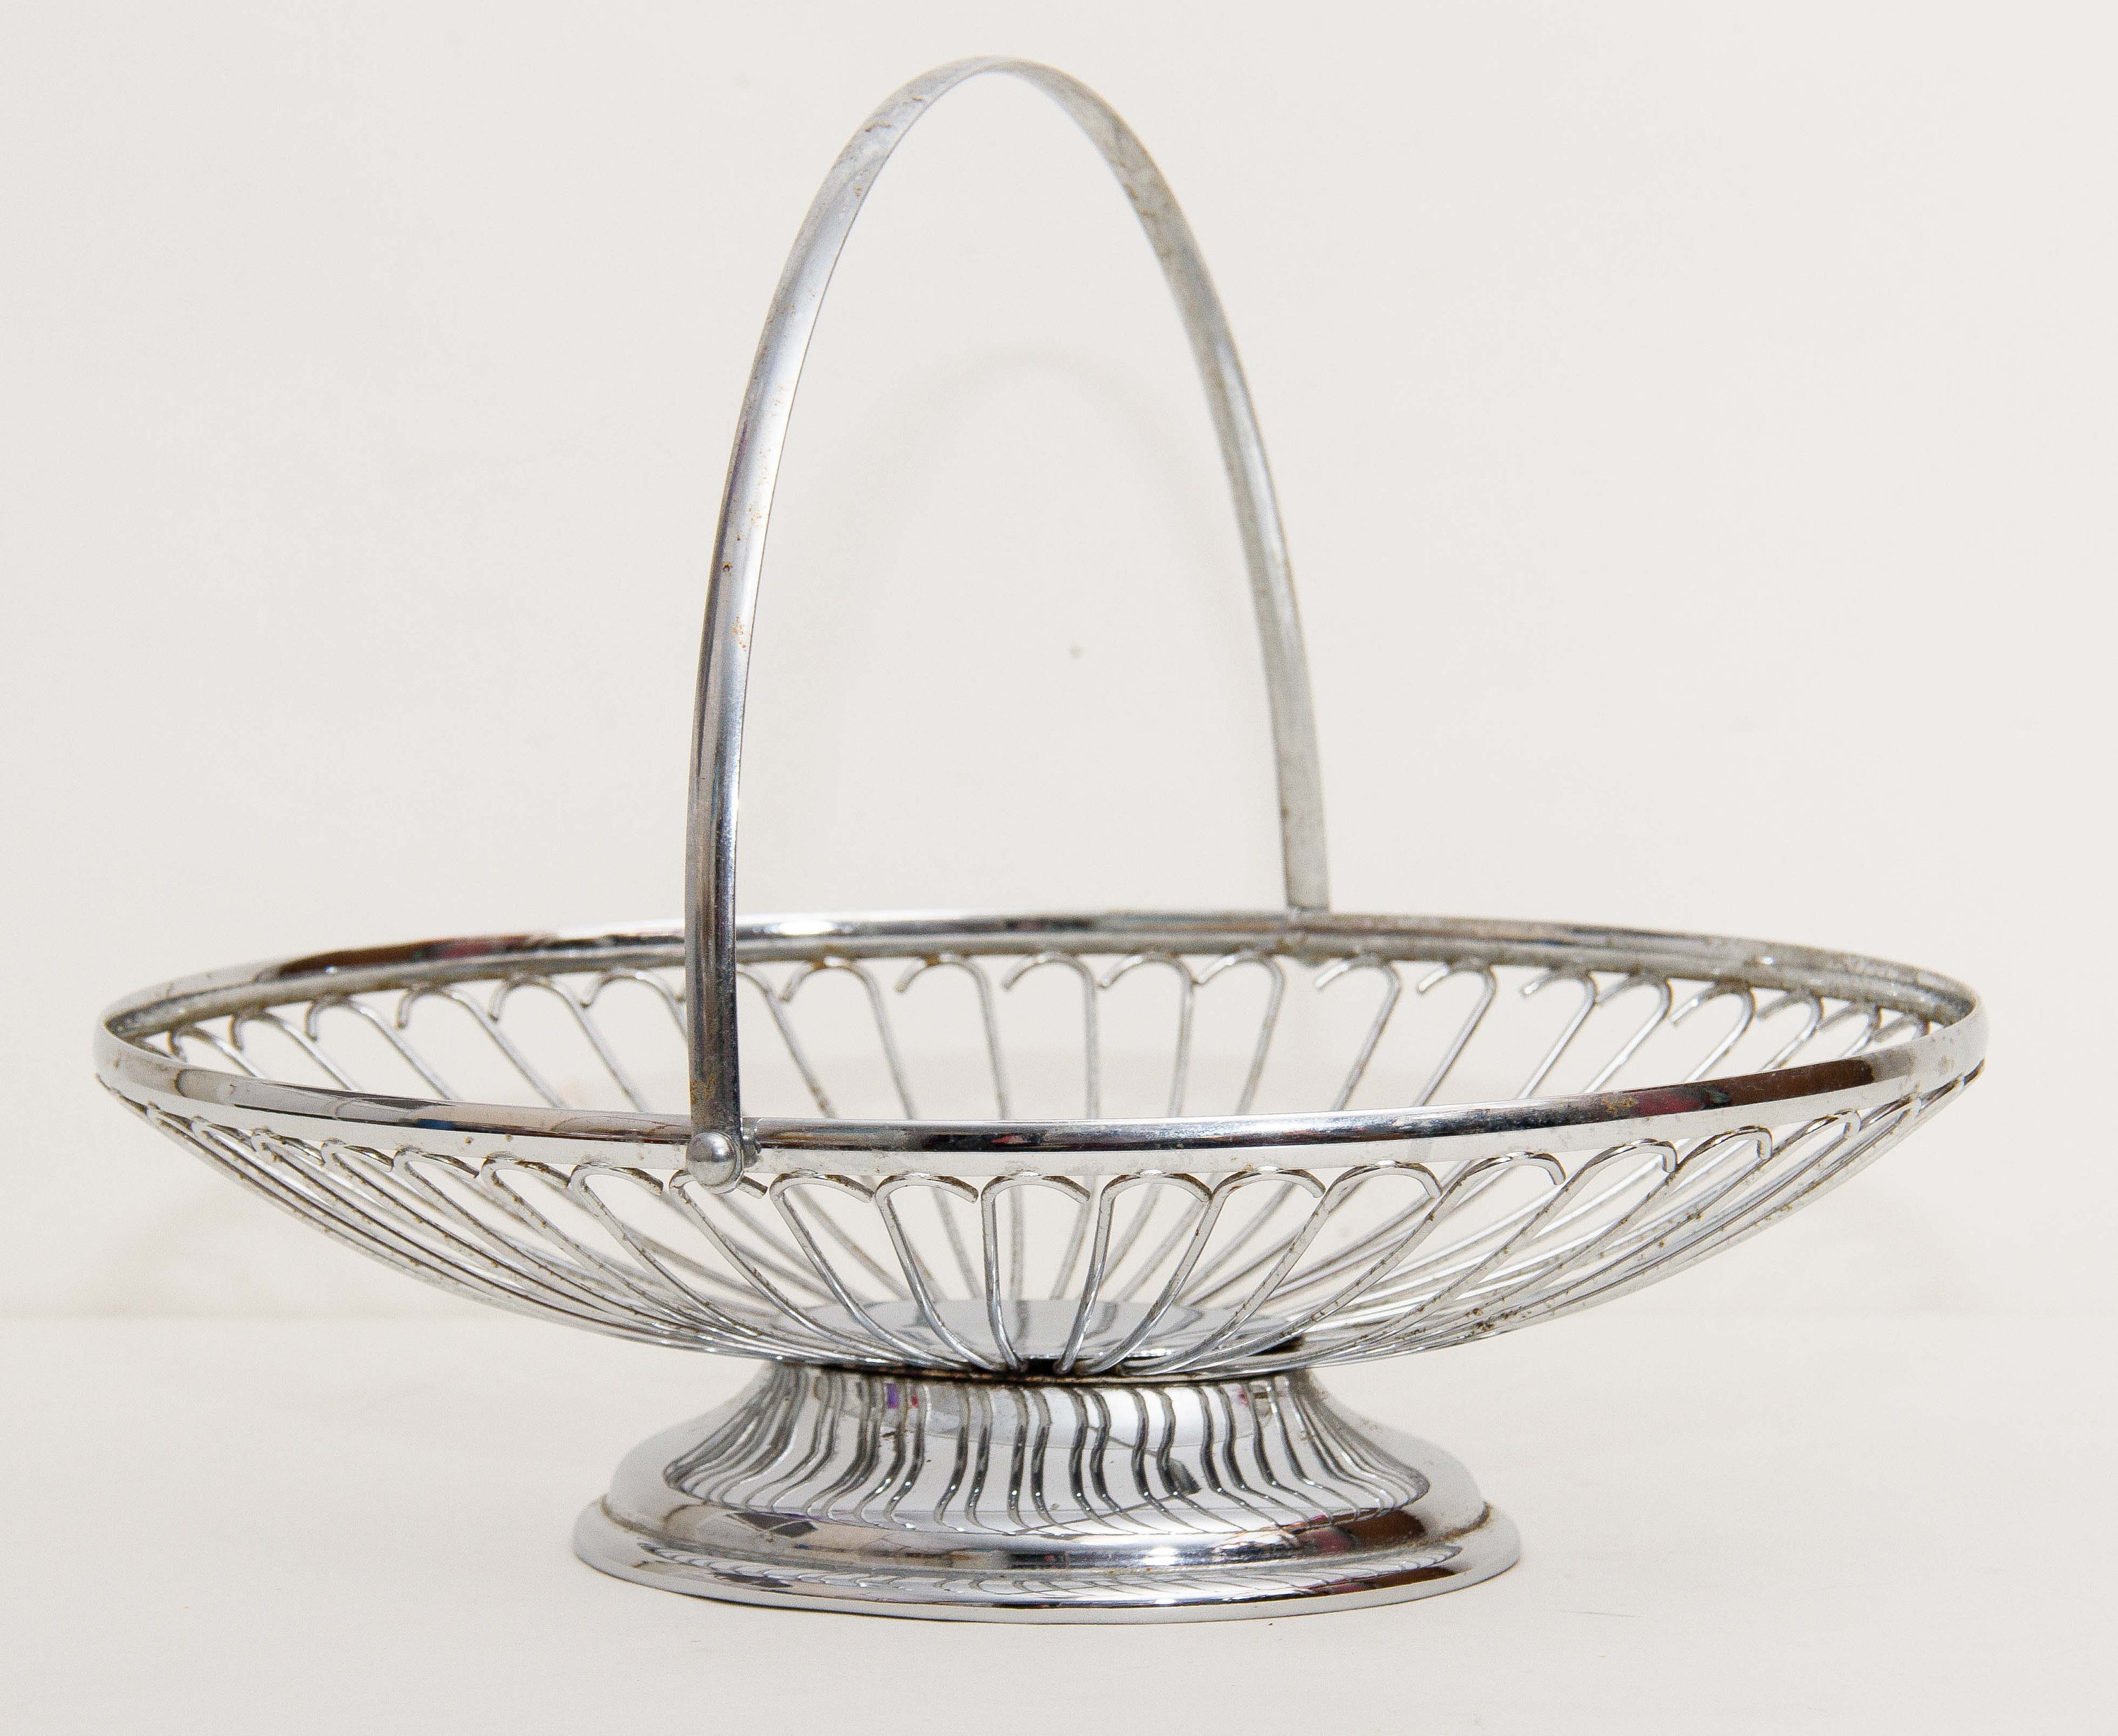 https://lovevintage.store/wp-content/uploads/2019/06/vintage-chrome-silver-metal-oval-wire-fruit-bowl-basket-with-handle-5cf7e51b.jpg